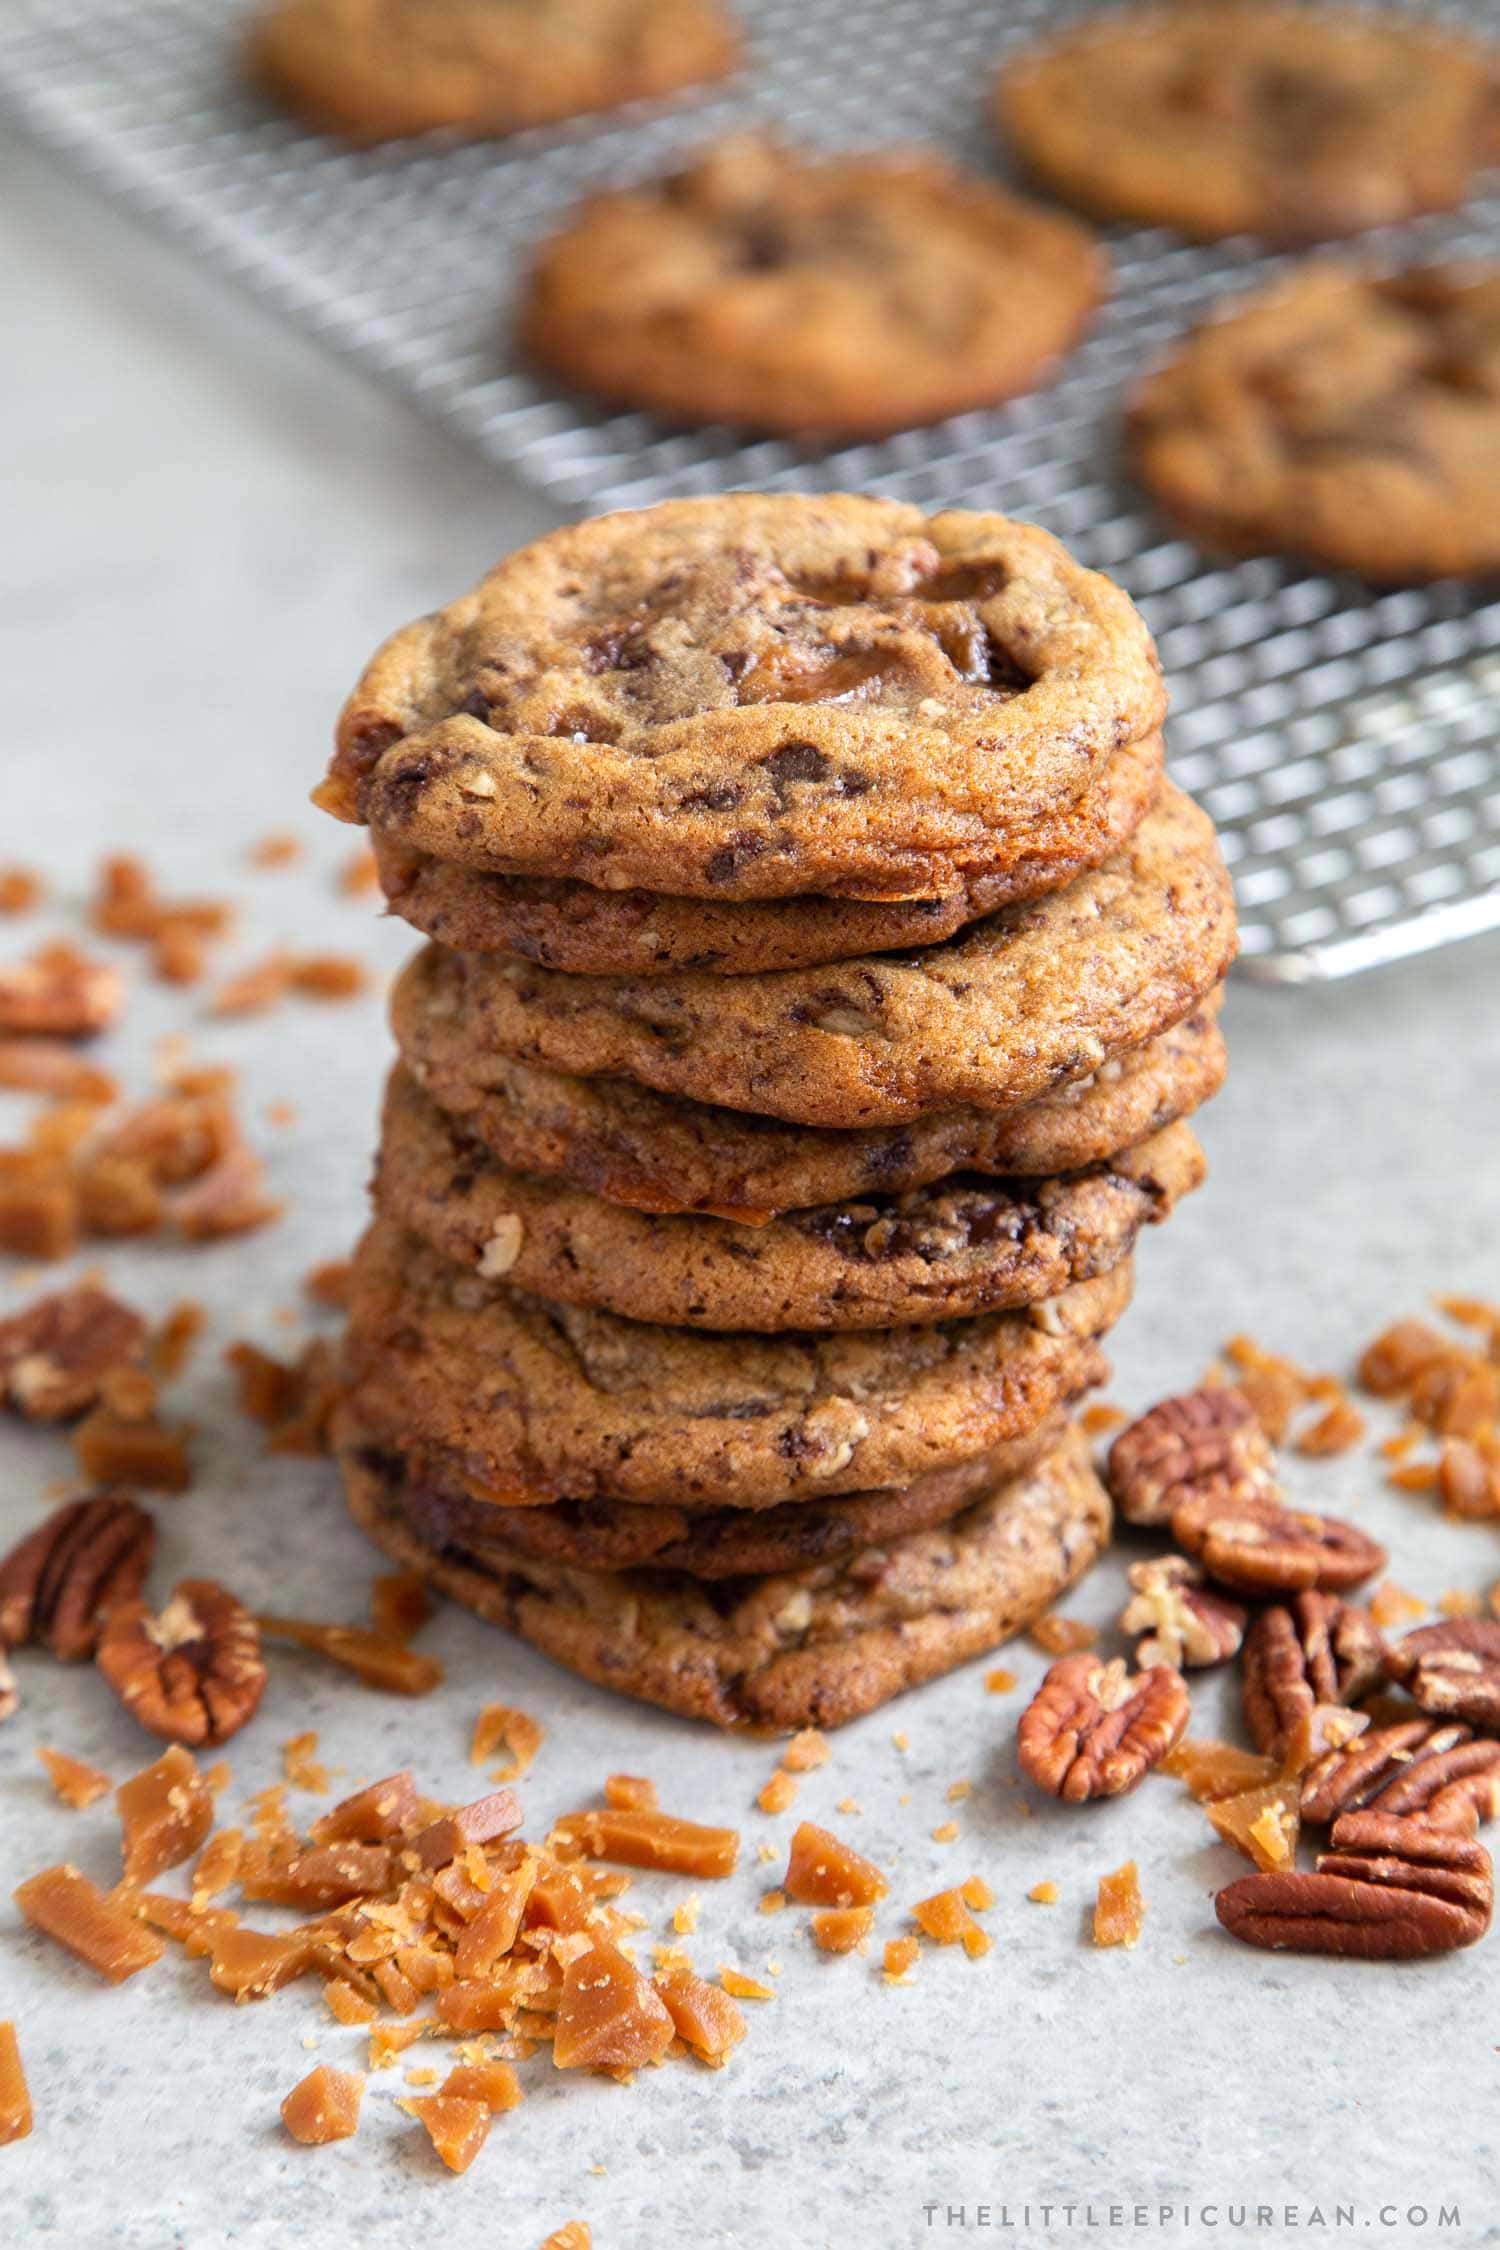 Pecan Toffee Chocolate Chunk Cookies - The Little Epicurean